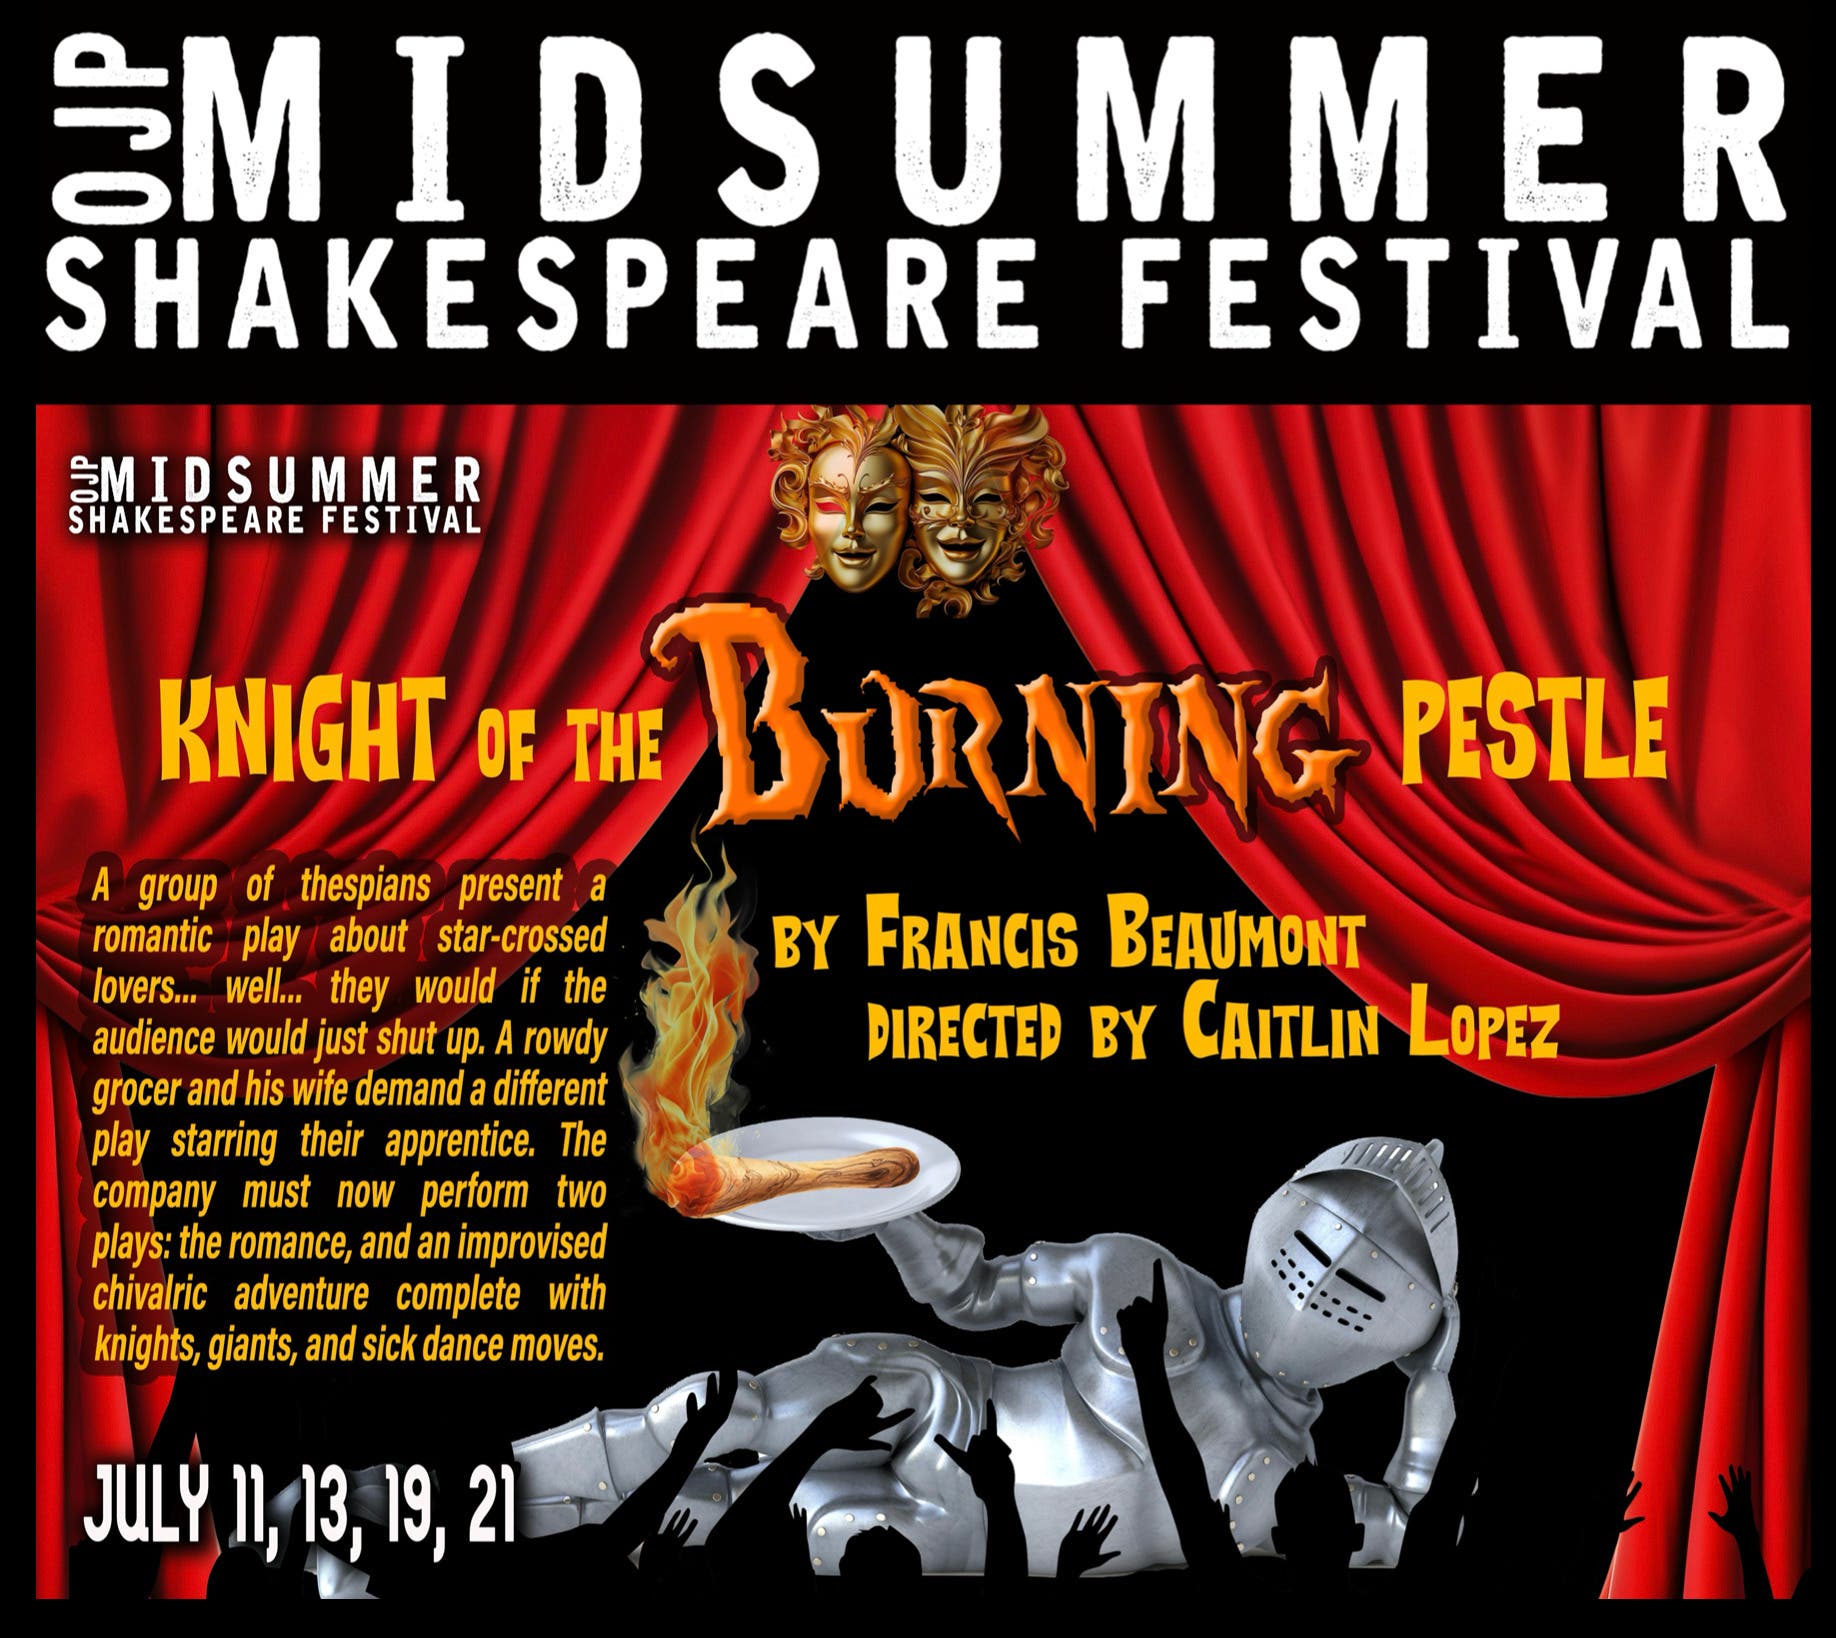 Annual Midsummer Shakespeare Festival presented by Ophelia's Jump - The Knight of the Burning Pestle